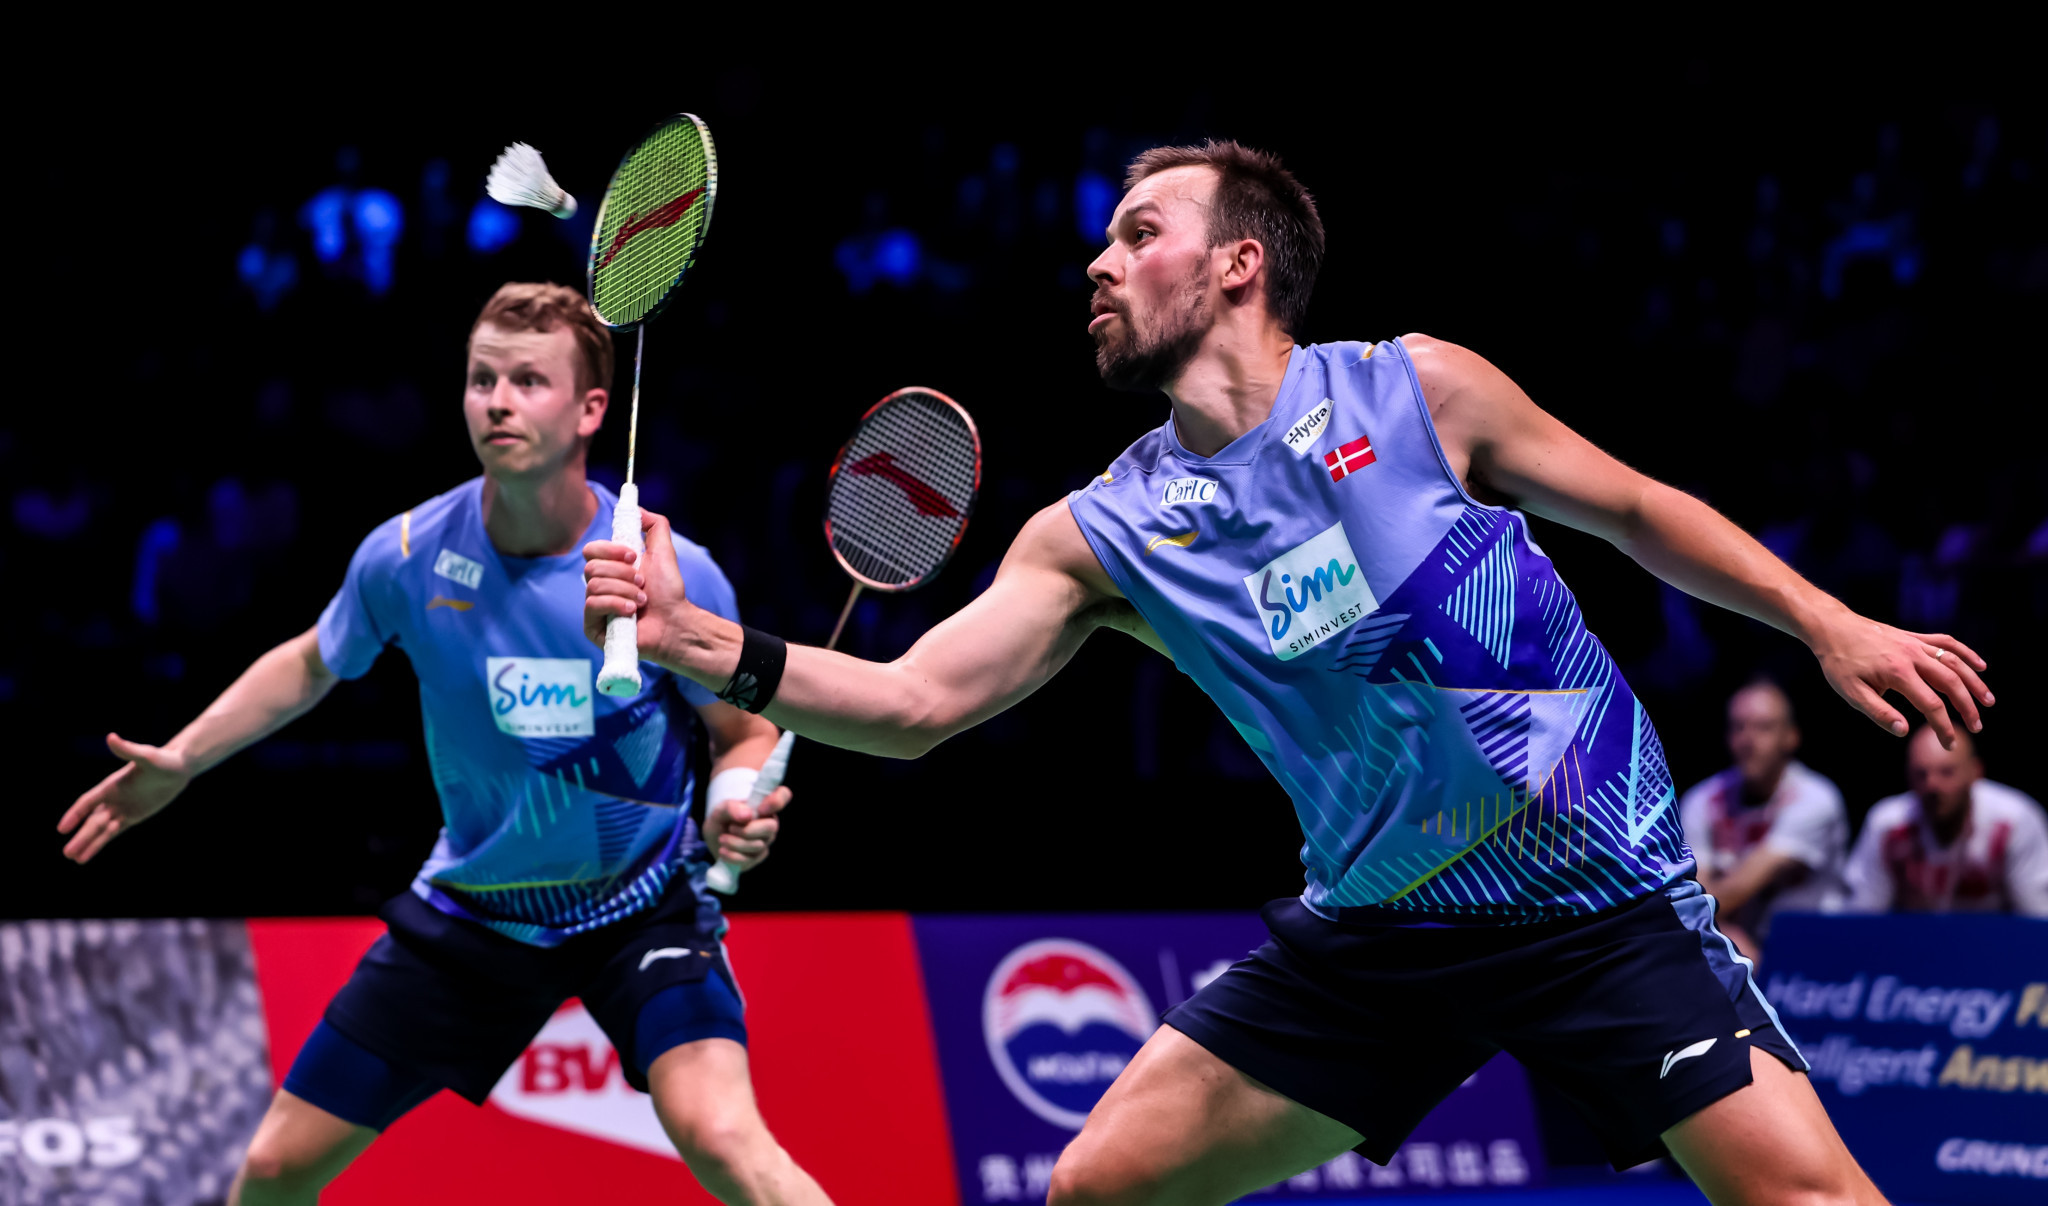 Denmark's Kim Astrup, left, and Anders Skaarup Rasmussen, right, thrilled the home crowd but came up short in the men's doubles final ©Badmintonphoto